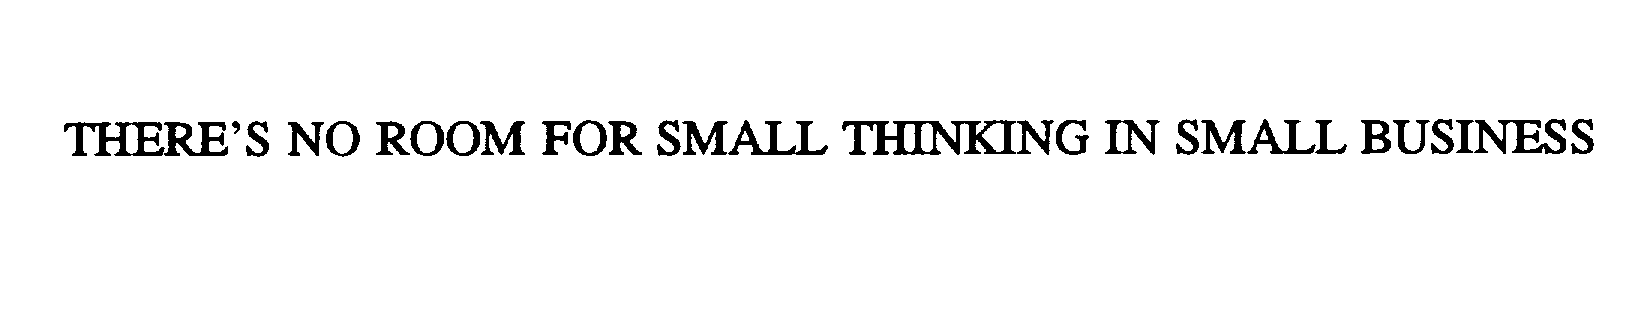  THERE'S NO ROOM FOR SMALL THINKING IN SMALL BUSINESS